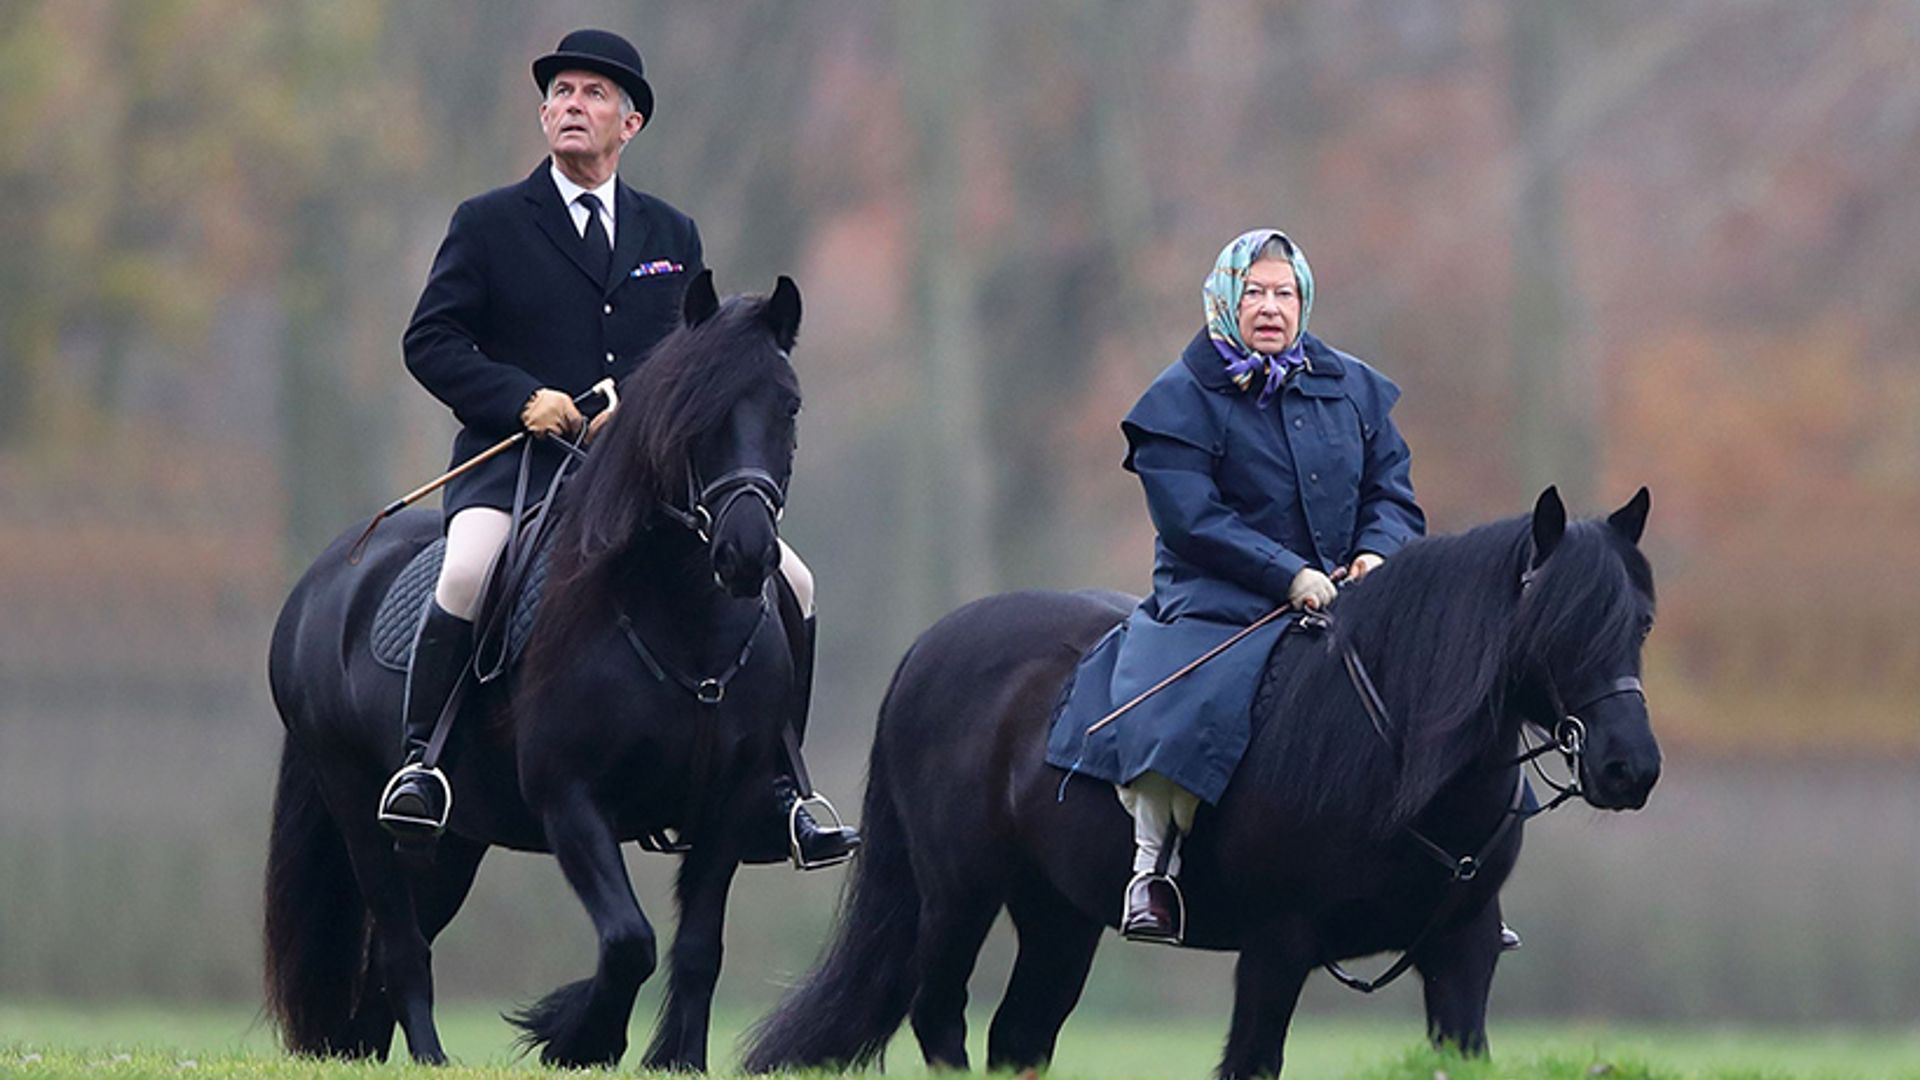 The Queen goes horse riding as Kate Middleton gives birth 